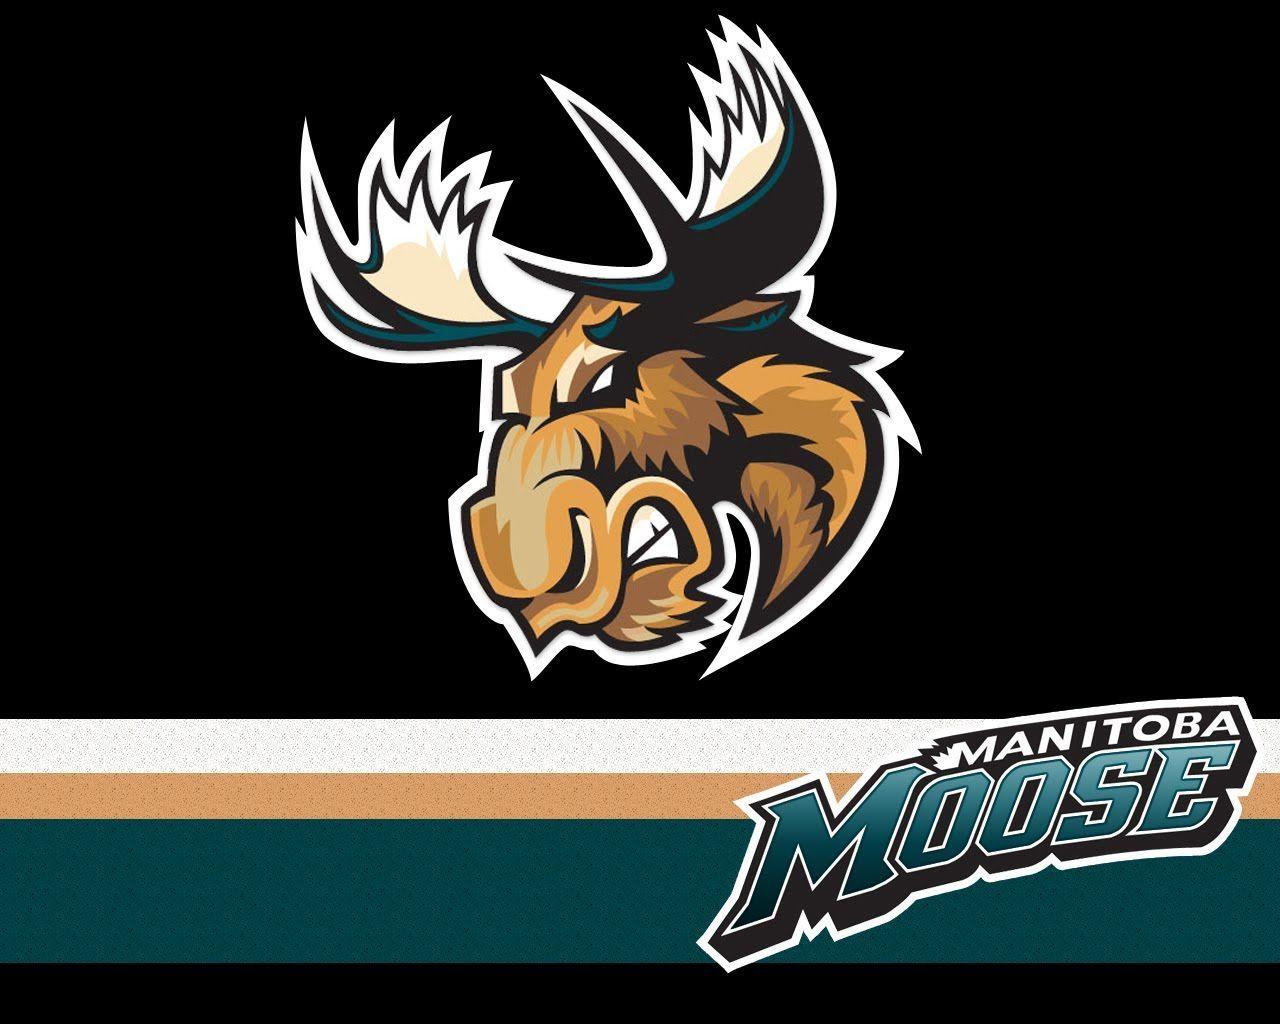 Manitoba Moose Logo - manitoba moose. Manitoba Moose Game Today. sports. Moose, Hockey